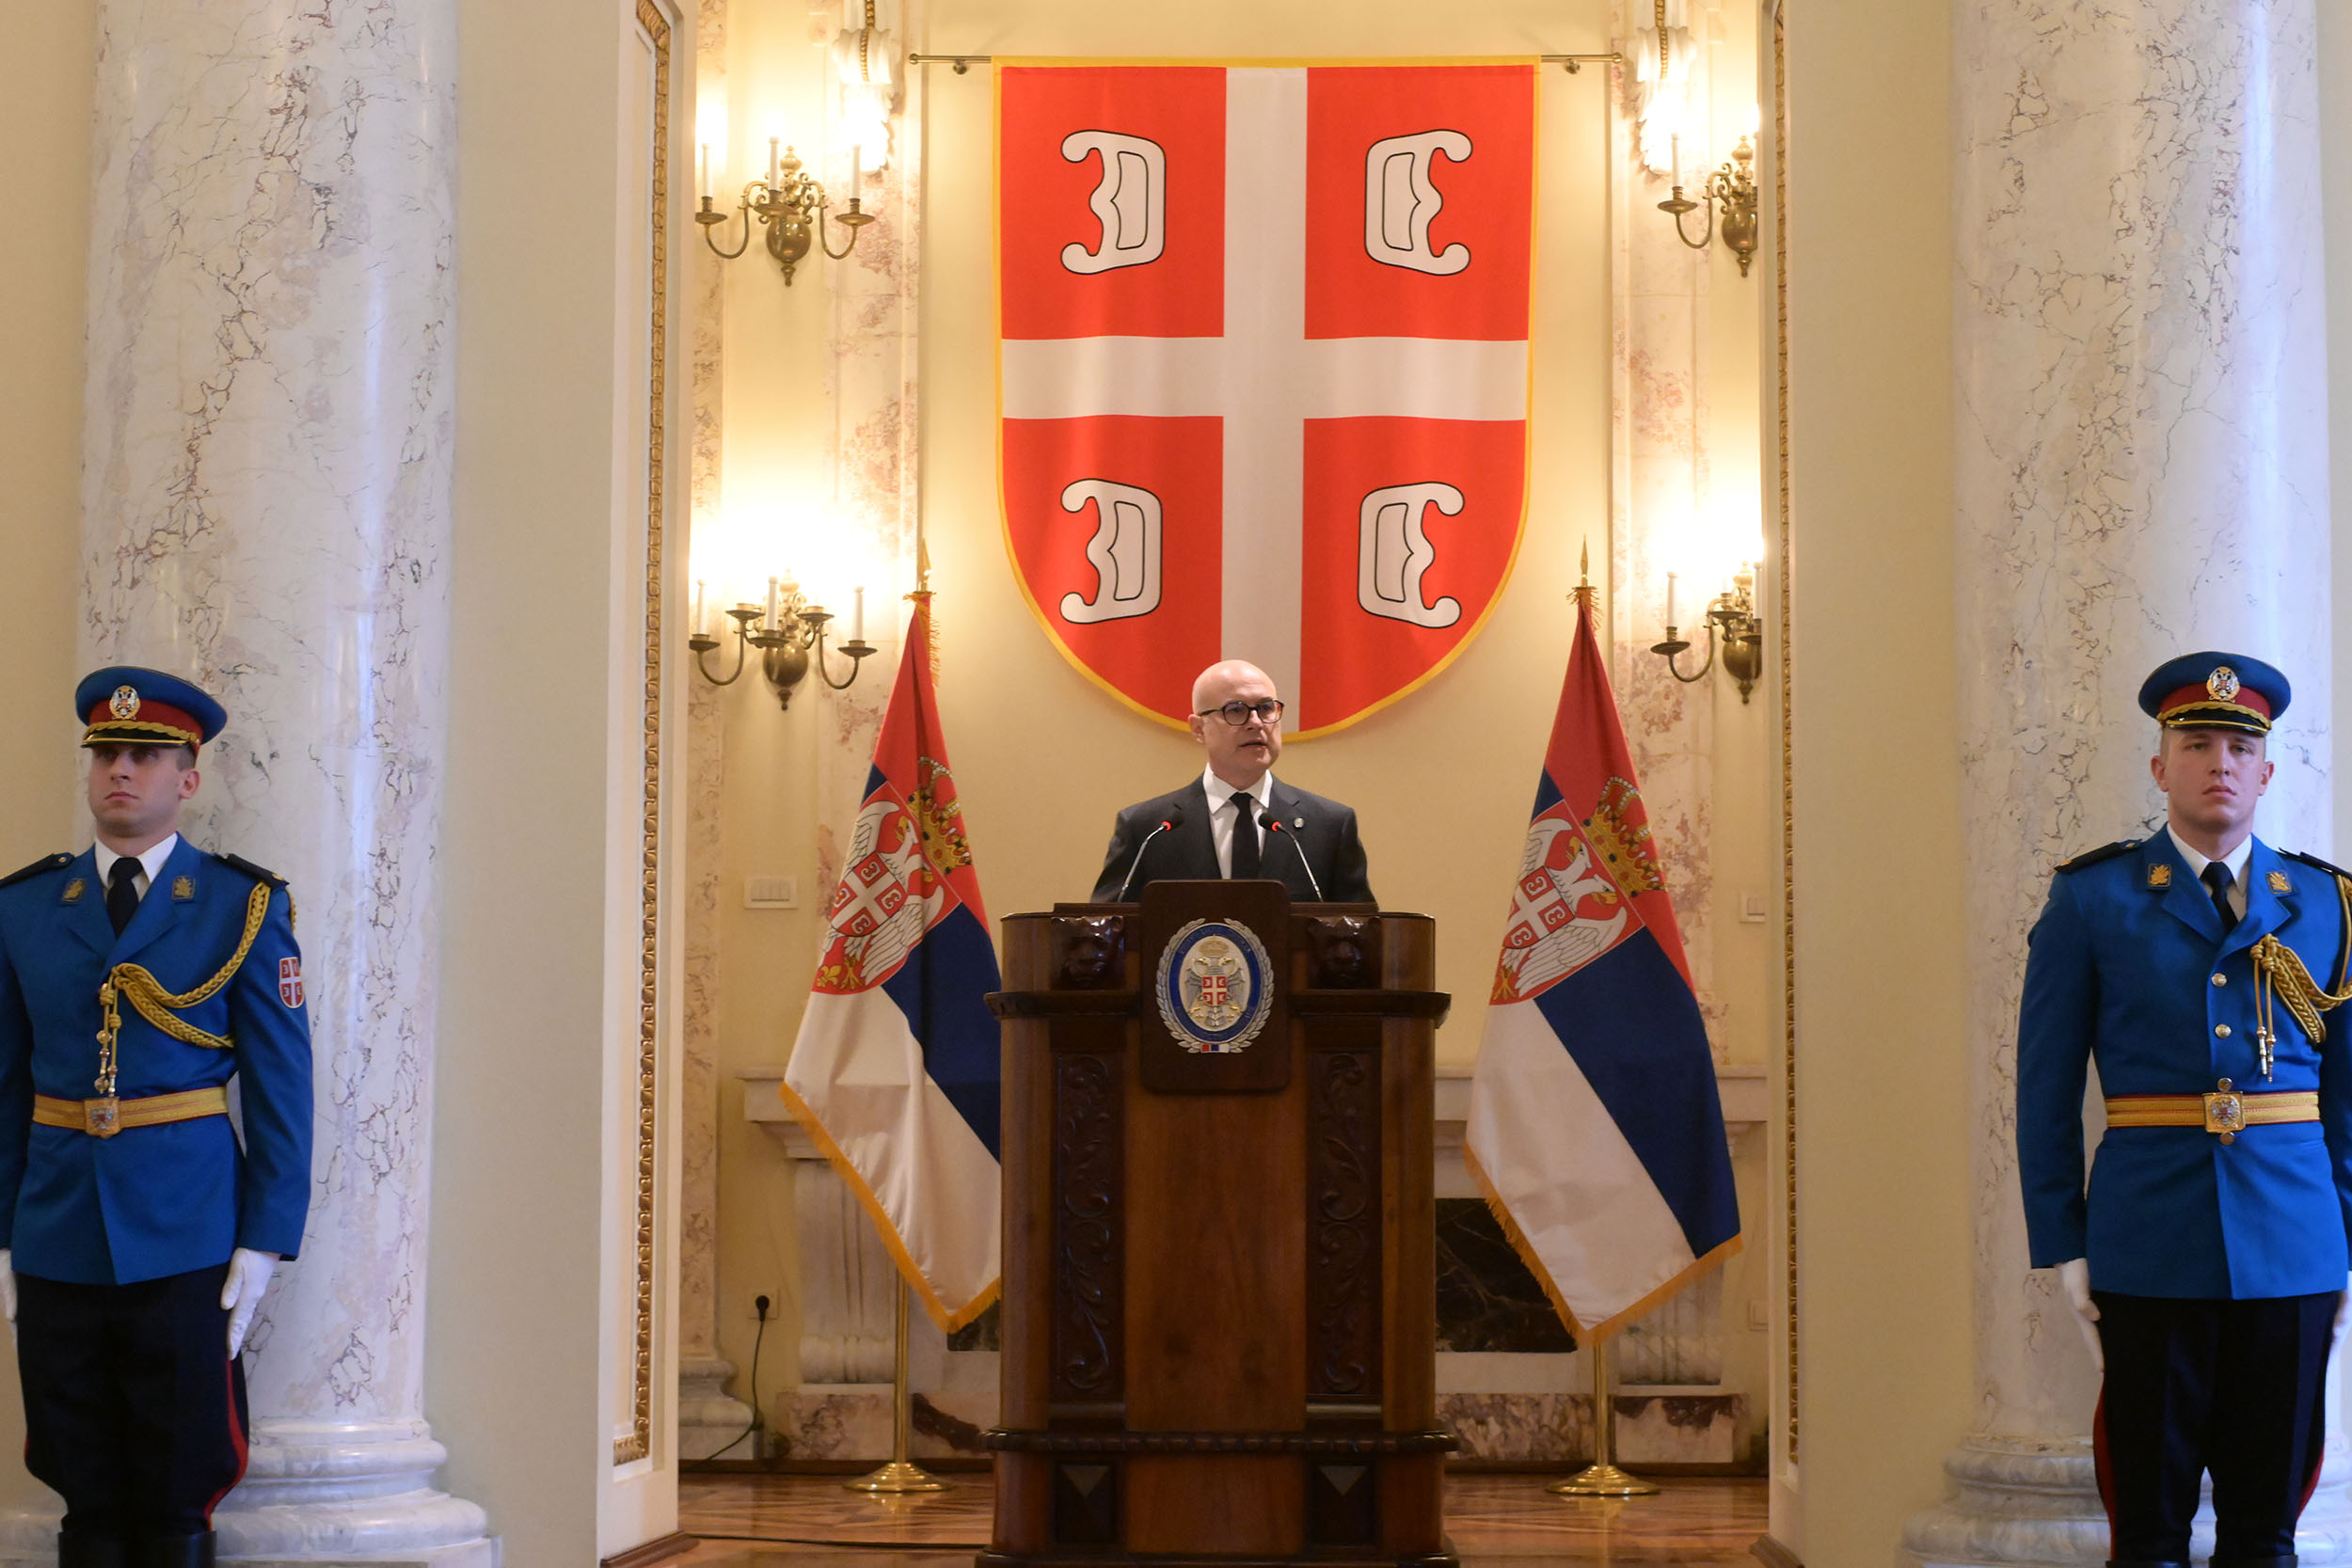 Minister Vučević presents decrees on promotions and appointments